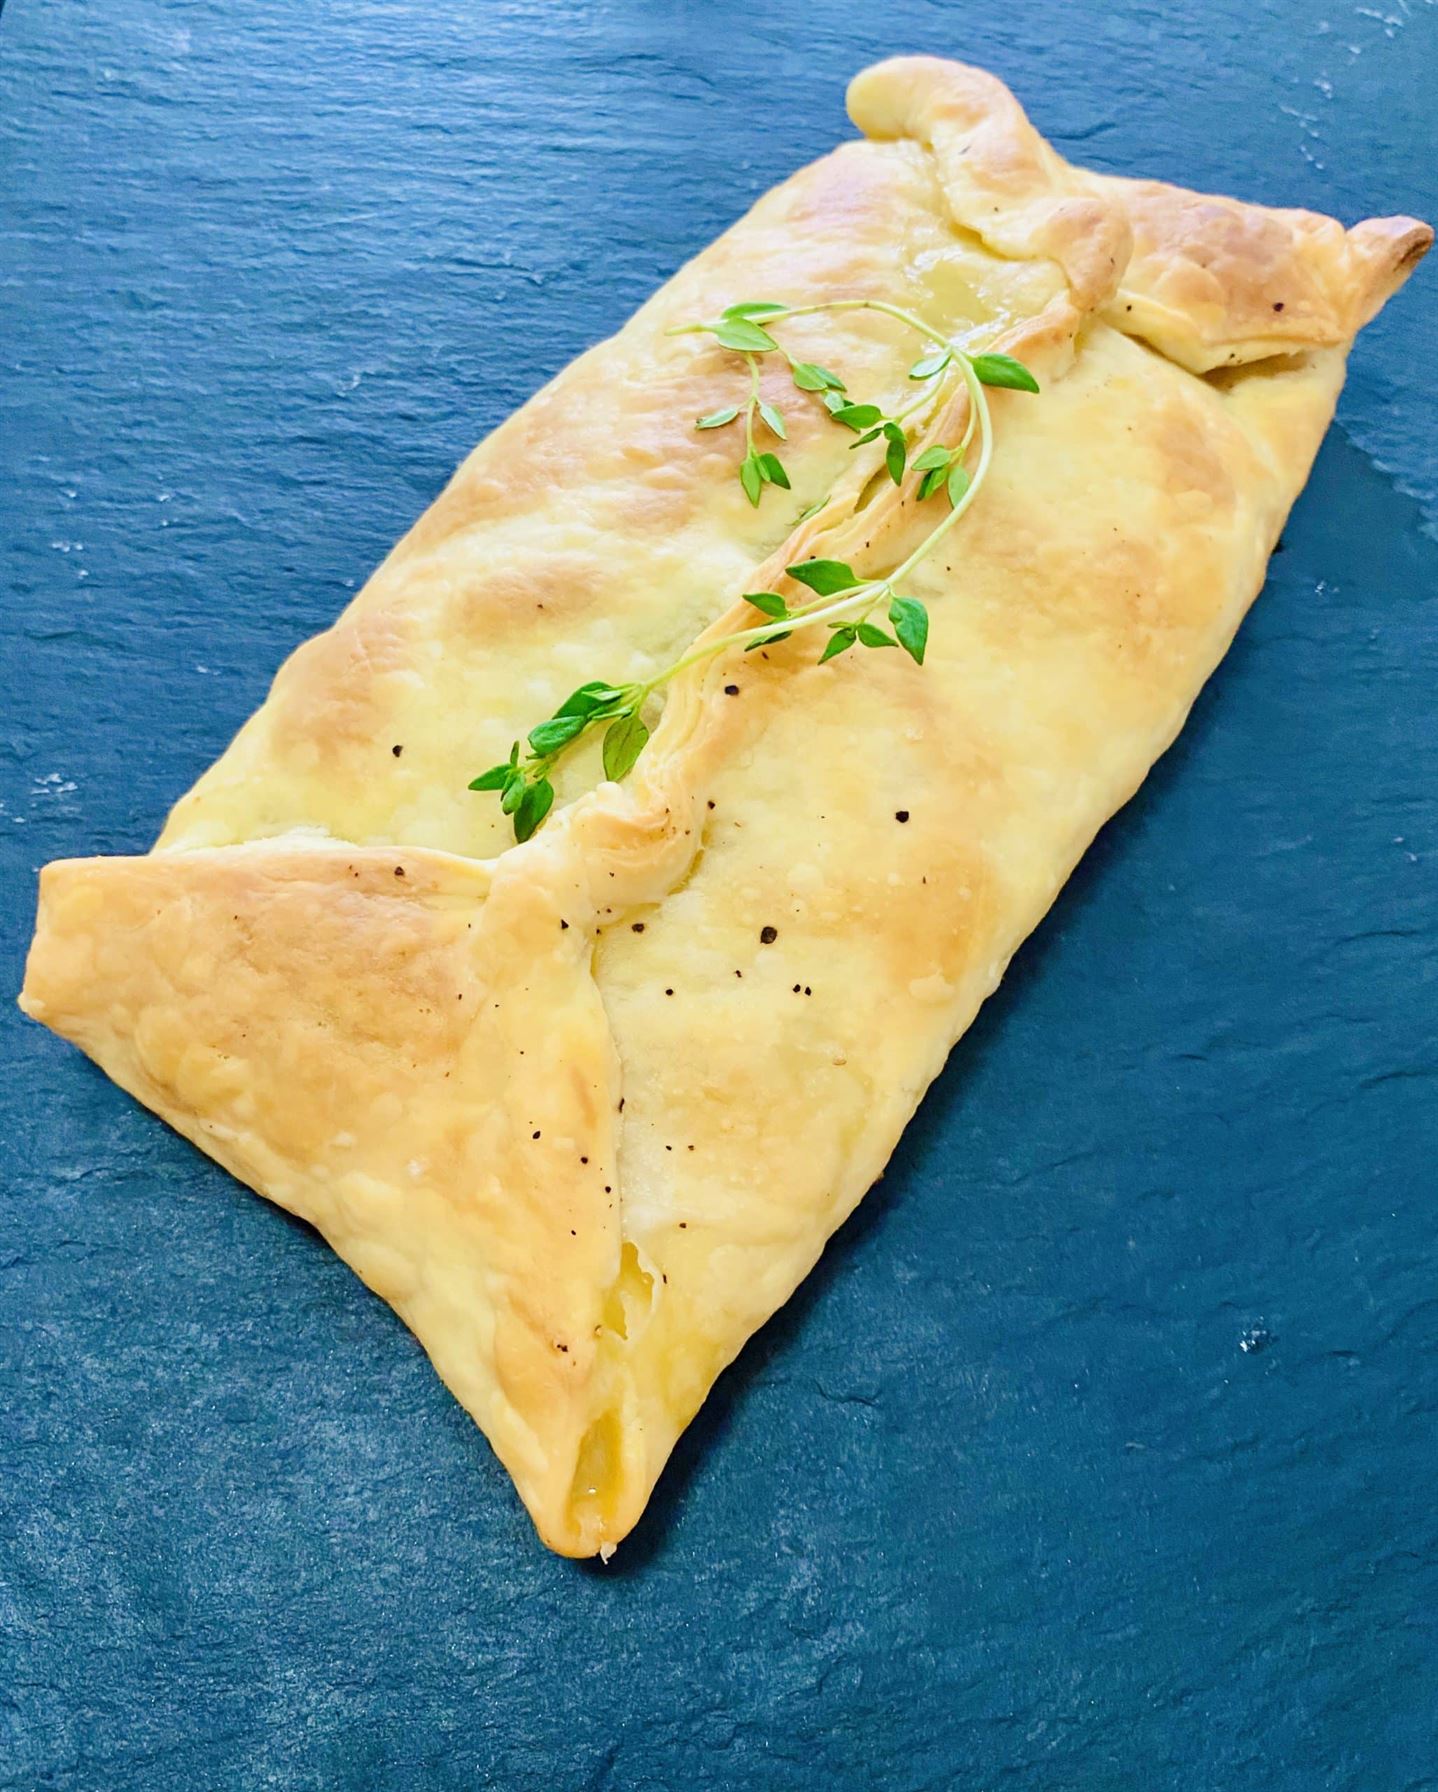 ChillaxBBQ Stay@Home Recipes #37 - Lemon Sole in Pastry